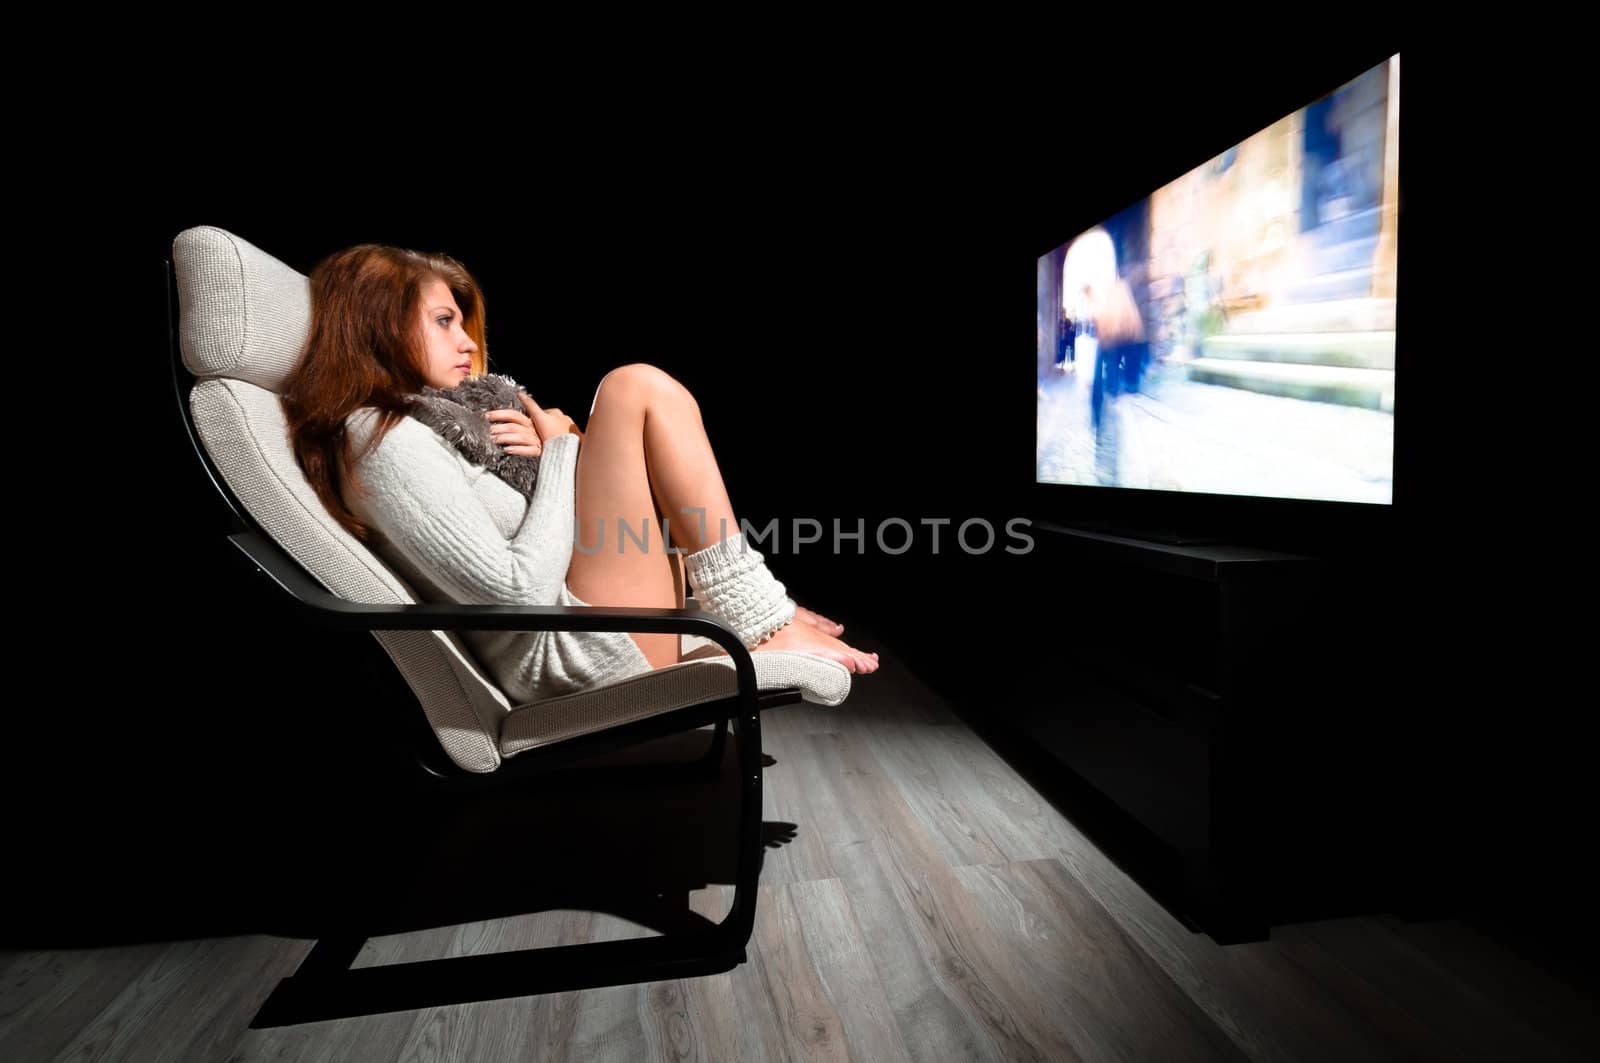 Girl sitting in front of large display in dark room with black background